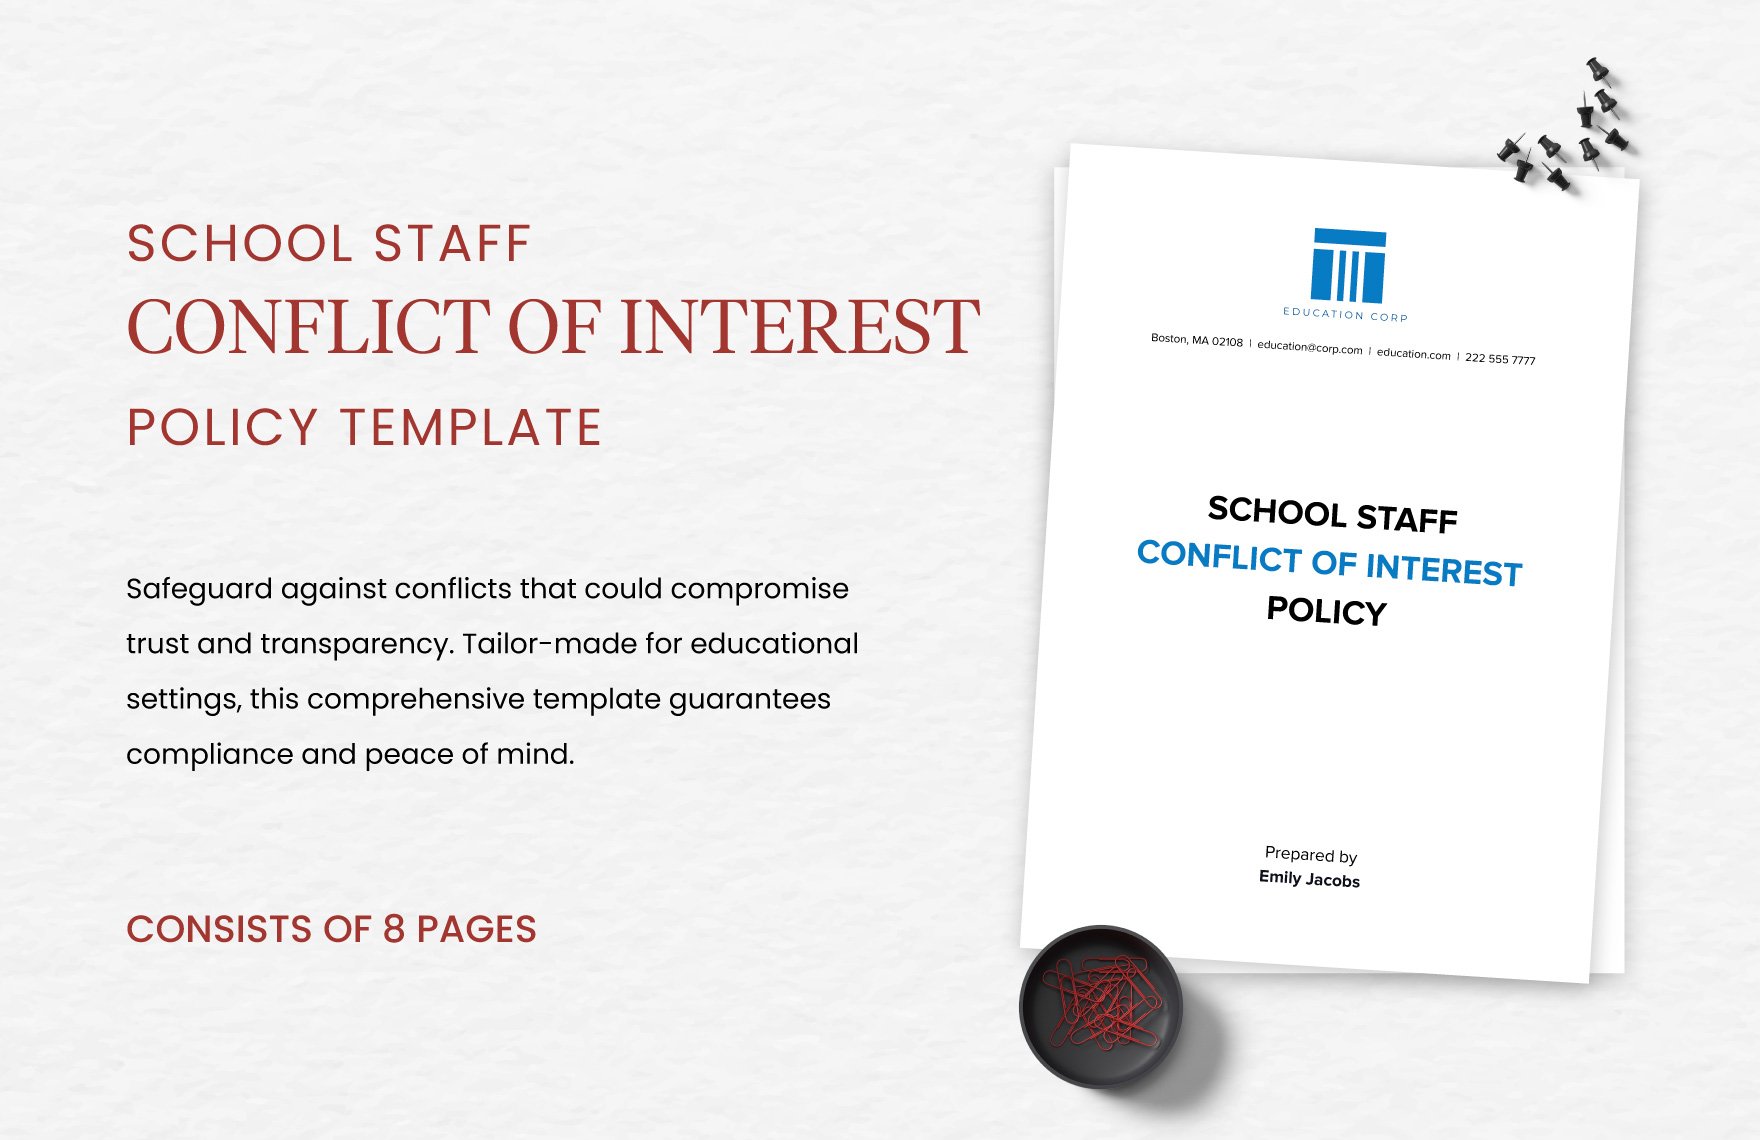 School Staff Conflict of Interest Policy Template